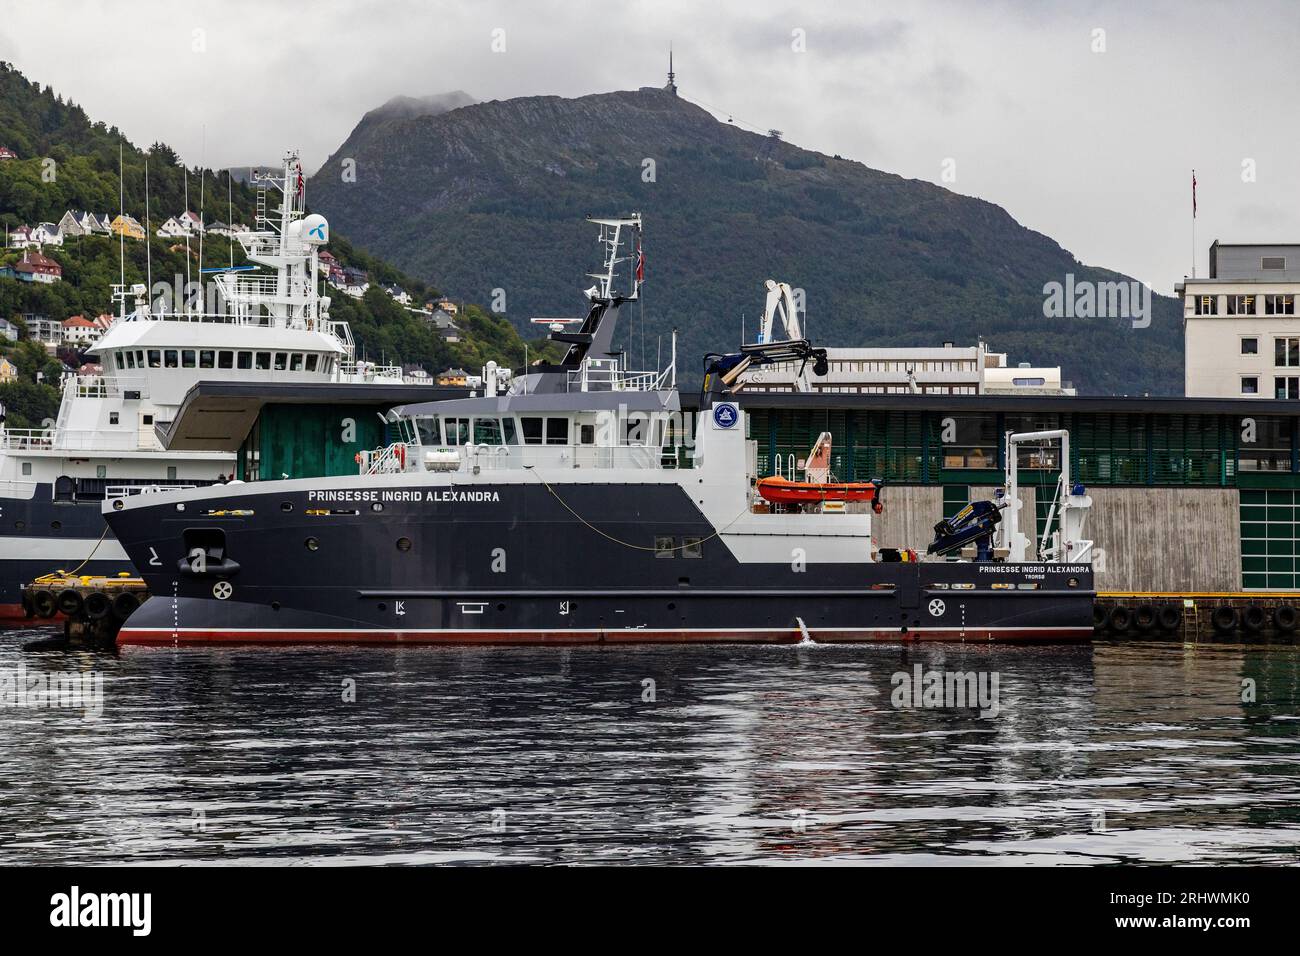 Ocean research vessel Prinsesse Ingrid Alexandra in the port of Bergen, Norway. Owned by the University of Bergen, Institute of Marine Research. A gra Stock Photo